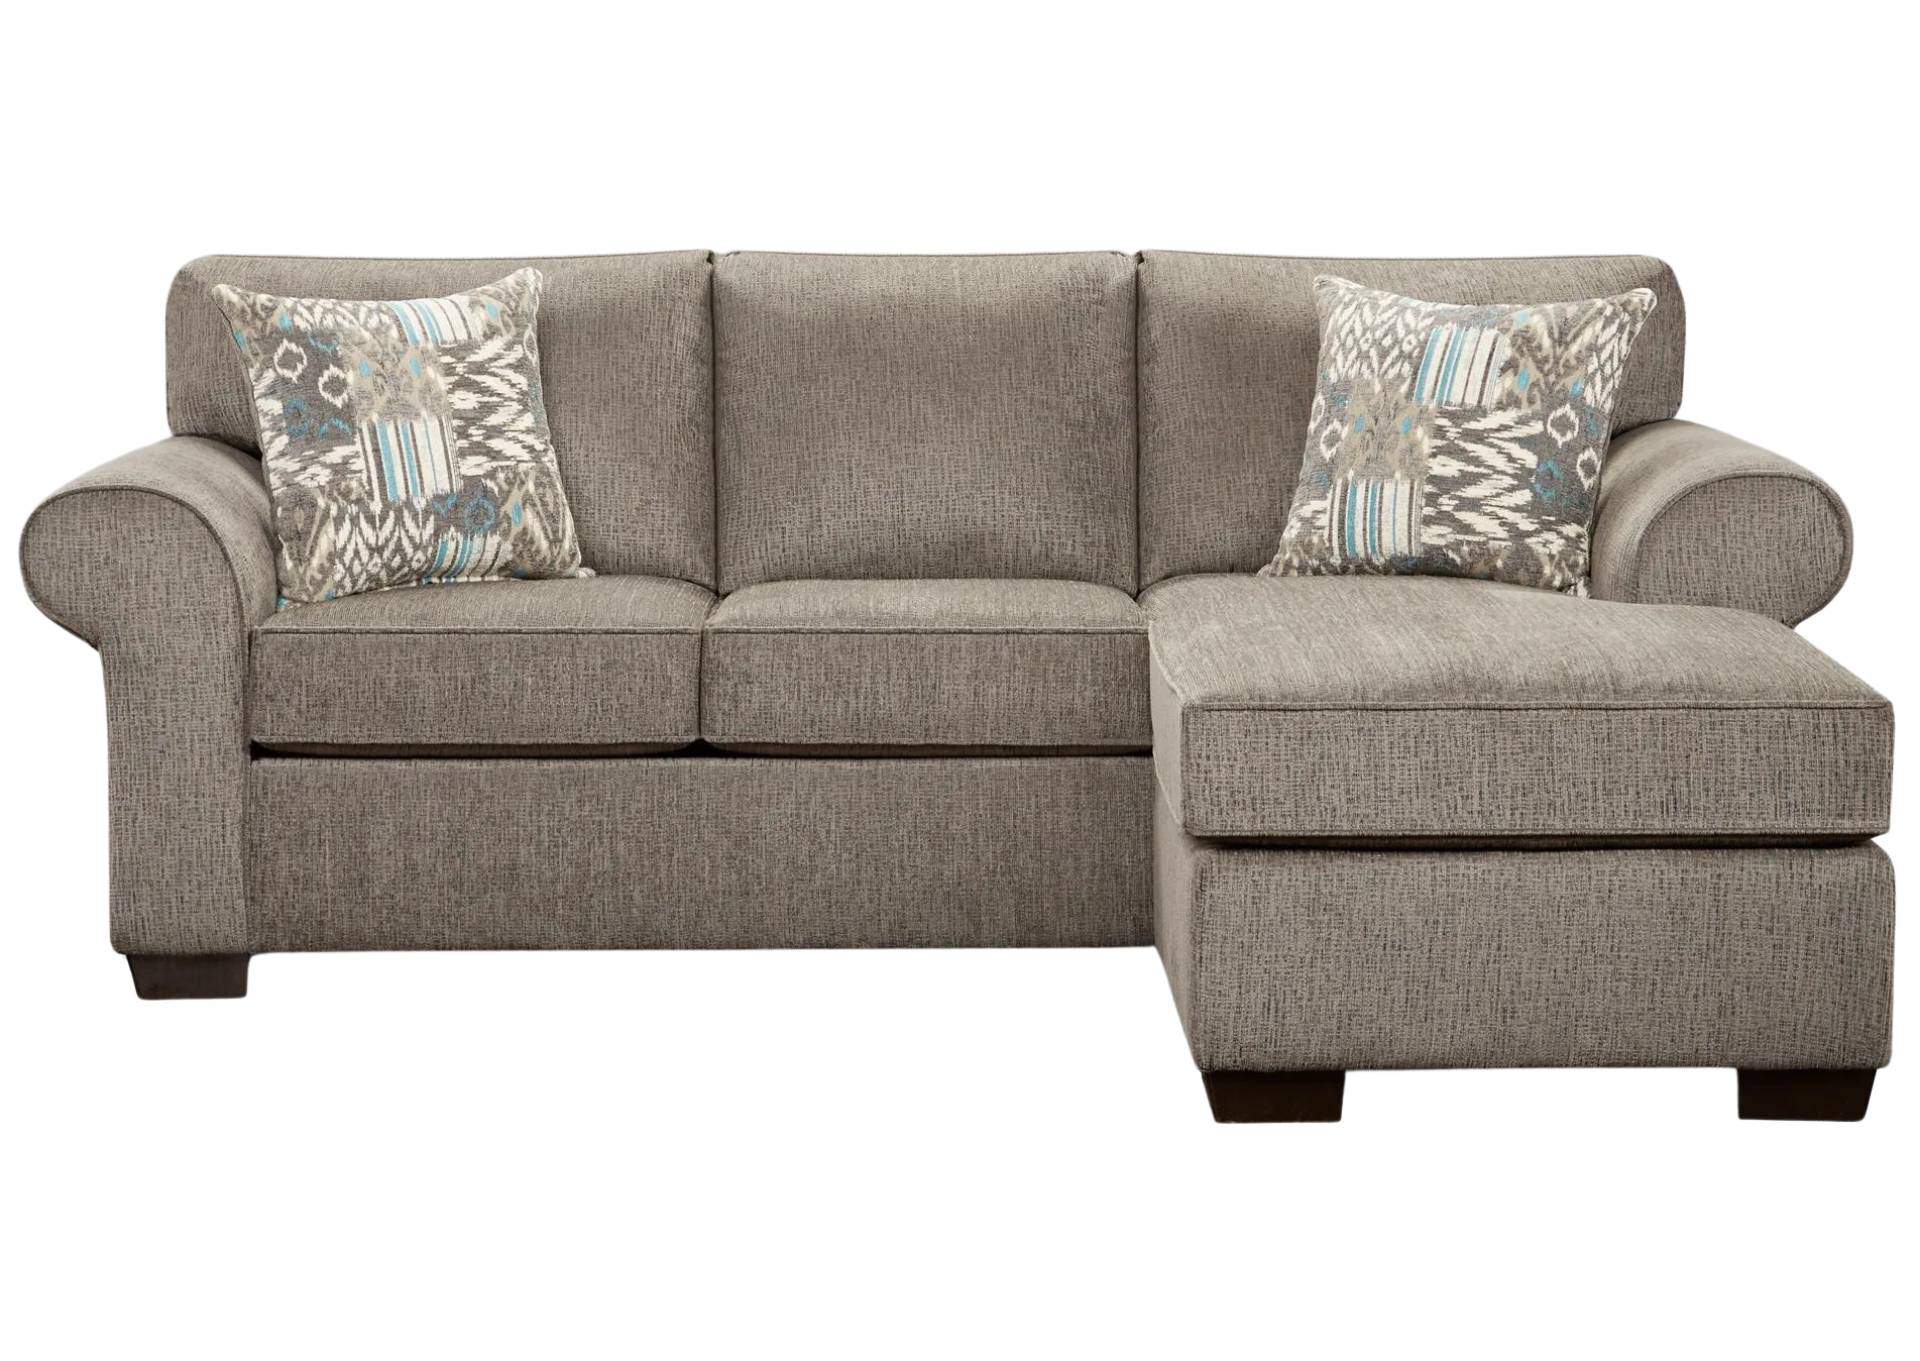 MARCEY NICKEL 2 PIECE SECTIONAL